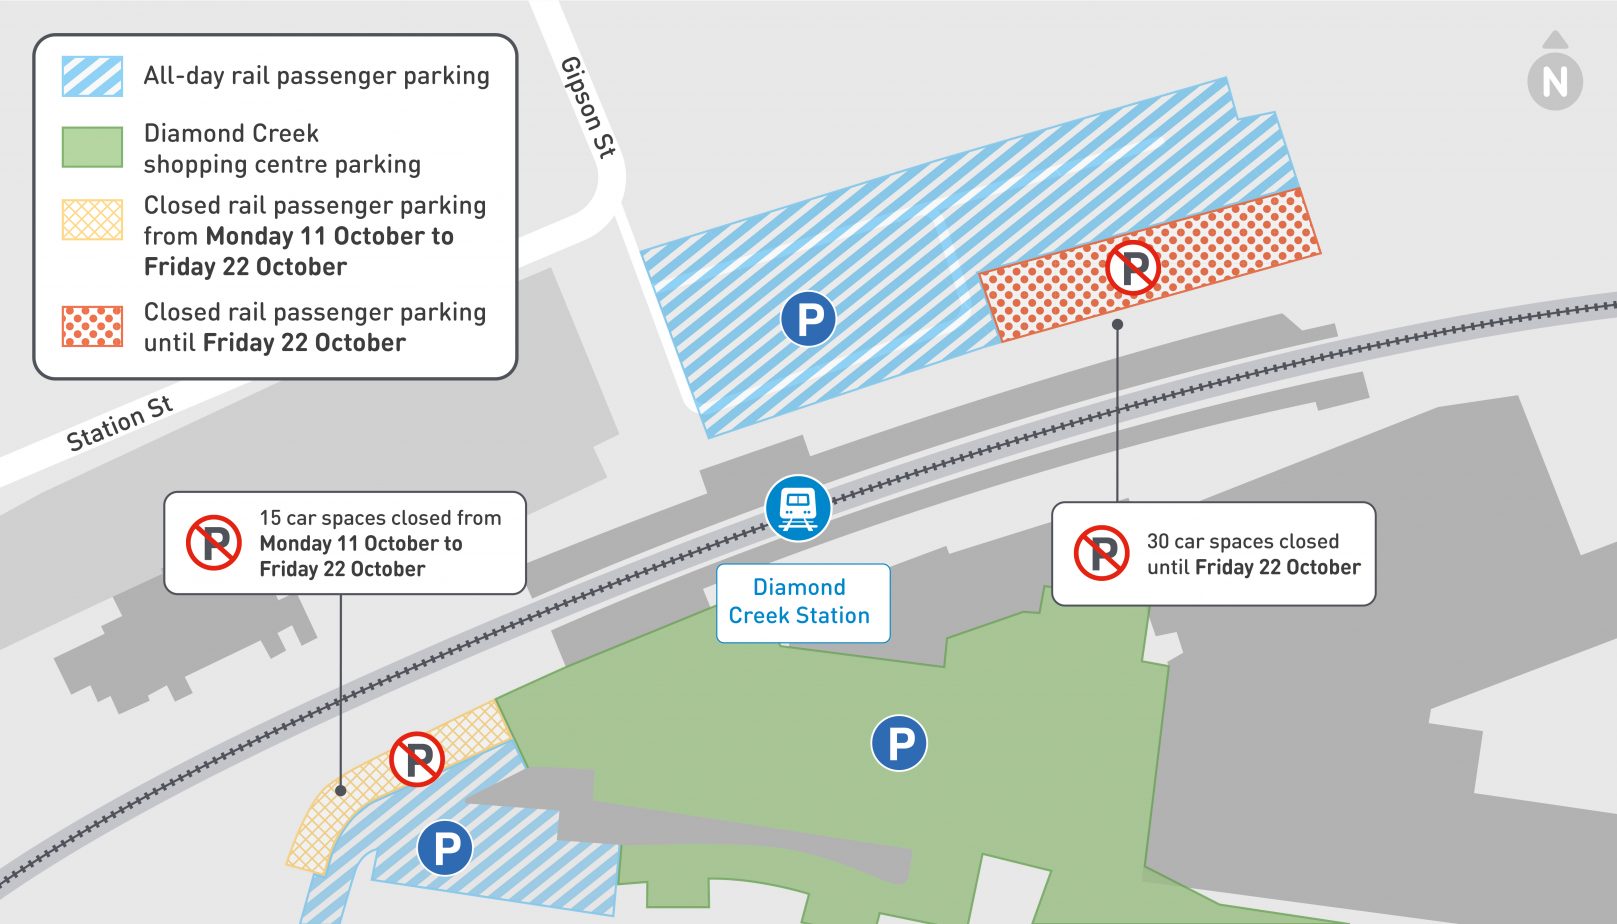 Diamond Creek Station car space closures - click to view larger version of map